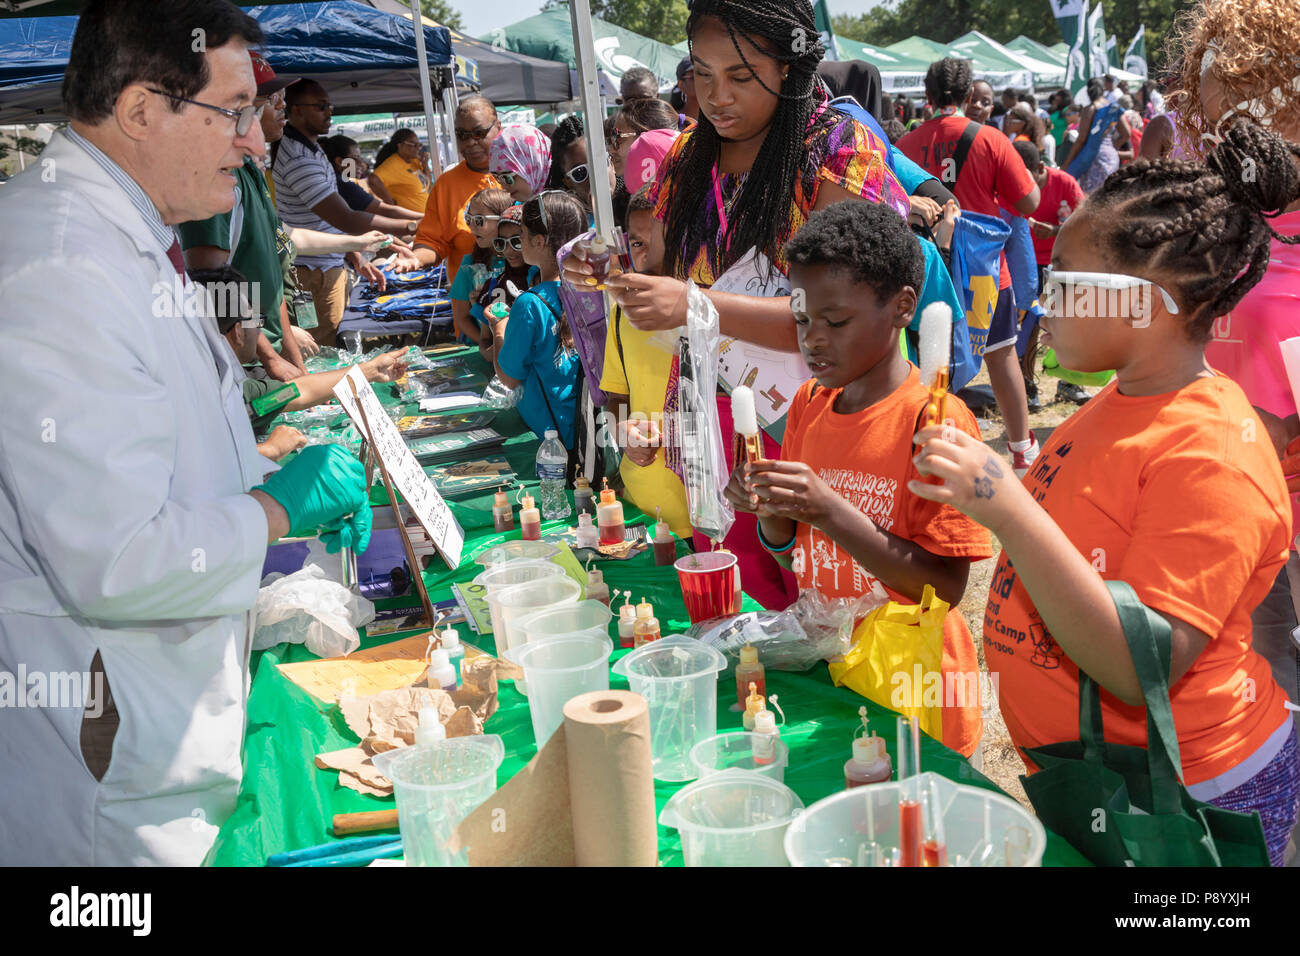 Detroit, Michigan - Dr. Emil Lozanov of Wayne State University helps students experiment with dry ice at Metro Detroit Youth Day. Thousands of childre Stock Photo